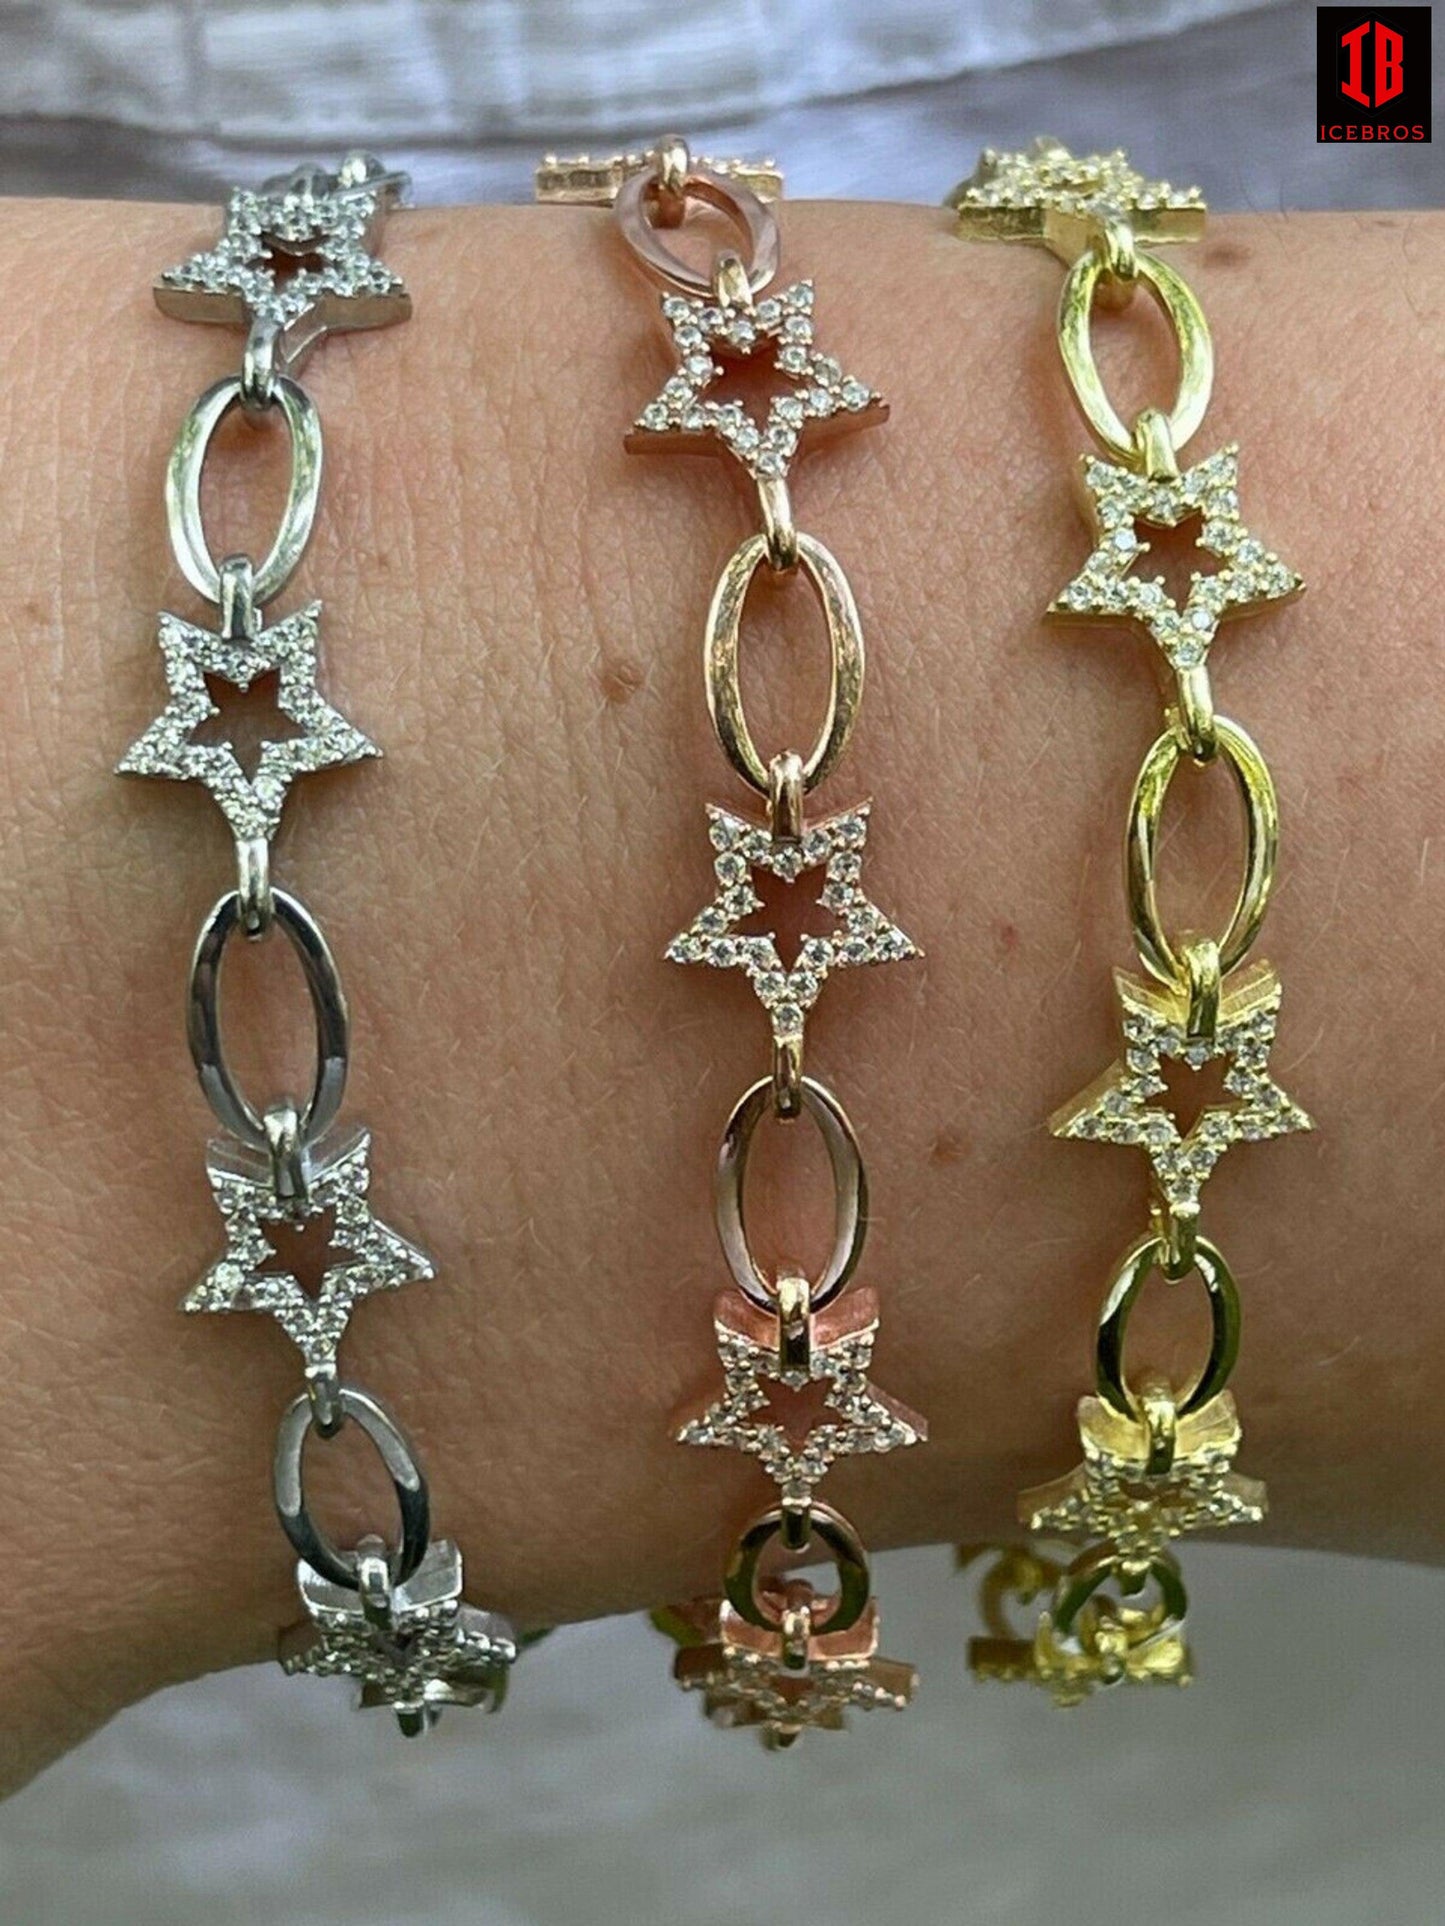 Girls Womens Real 925 Sterling Silver / Yellow Rose Rolo Star Charm Bracelet